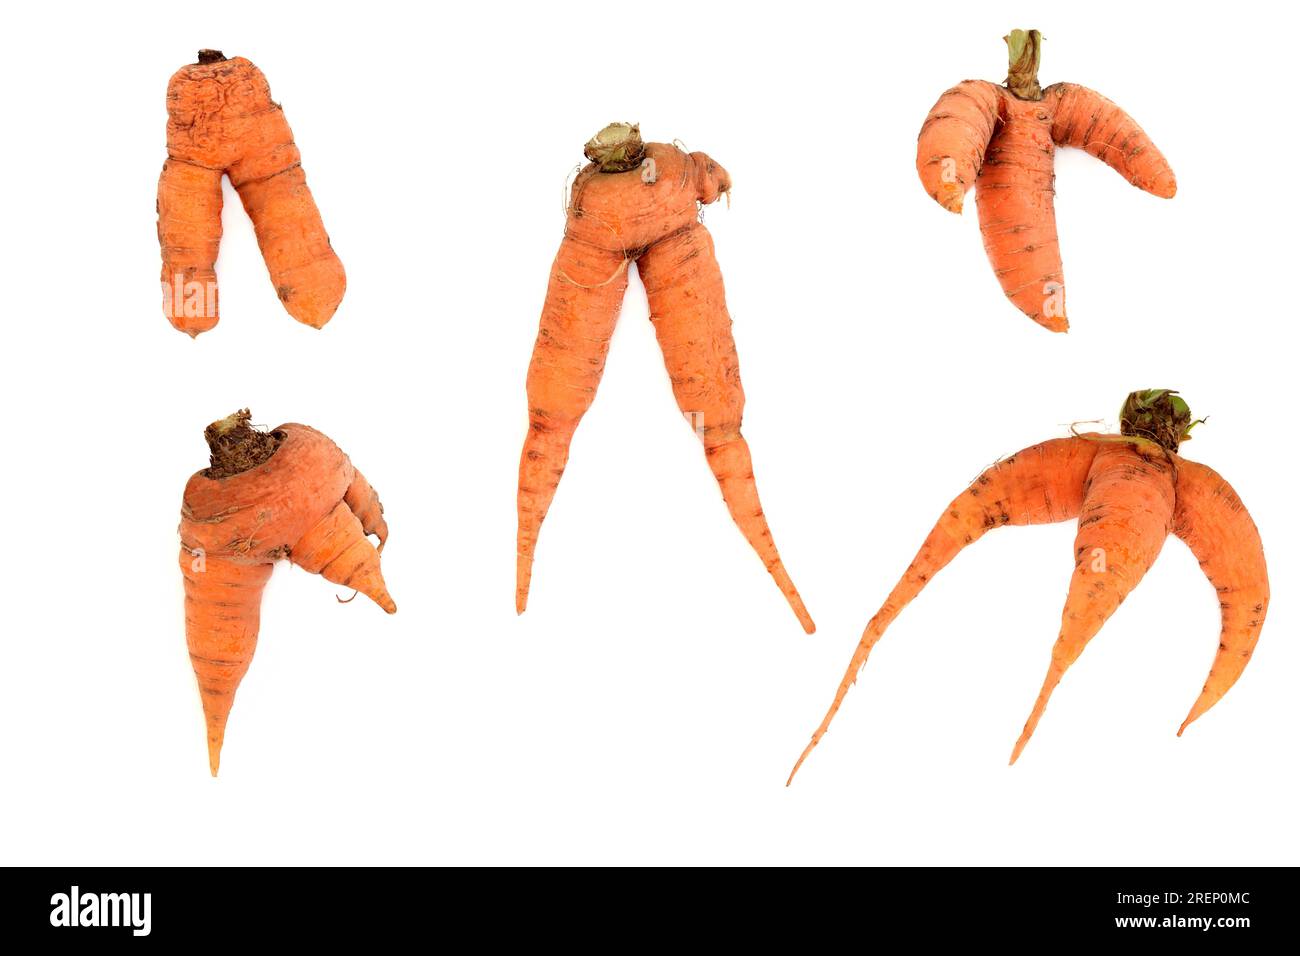 Forked and deformed carrot vegetables. Organic imperfect examples on white background. Stock Photo